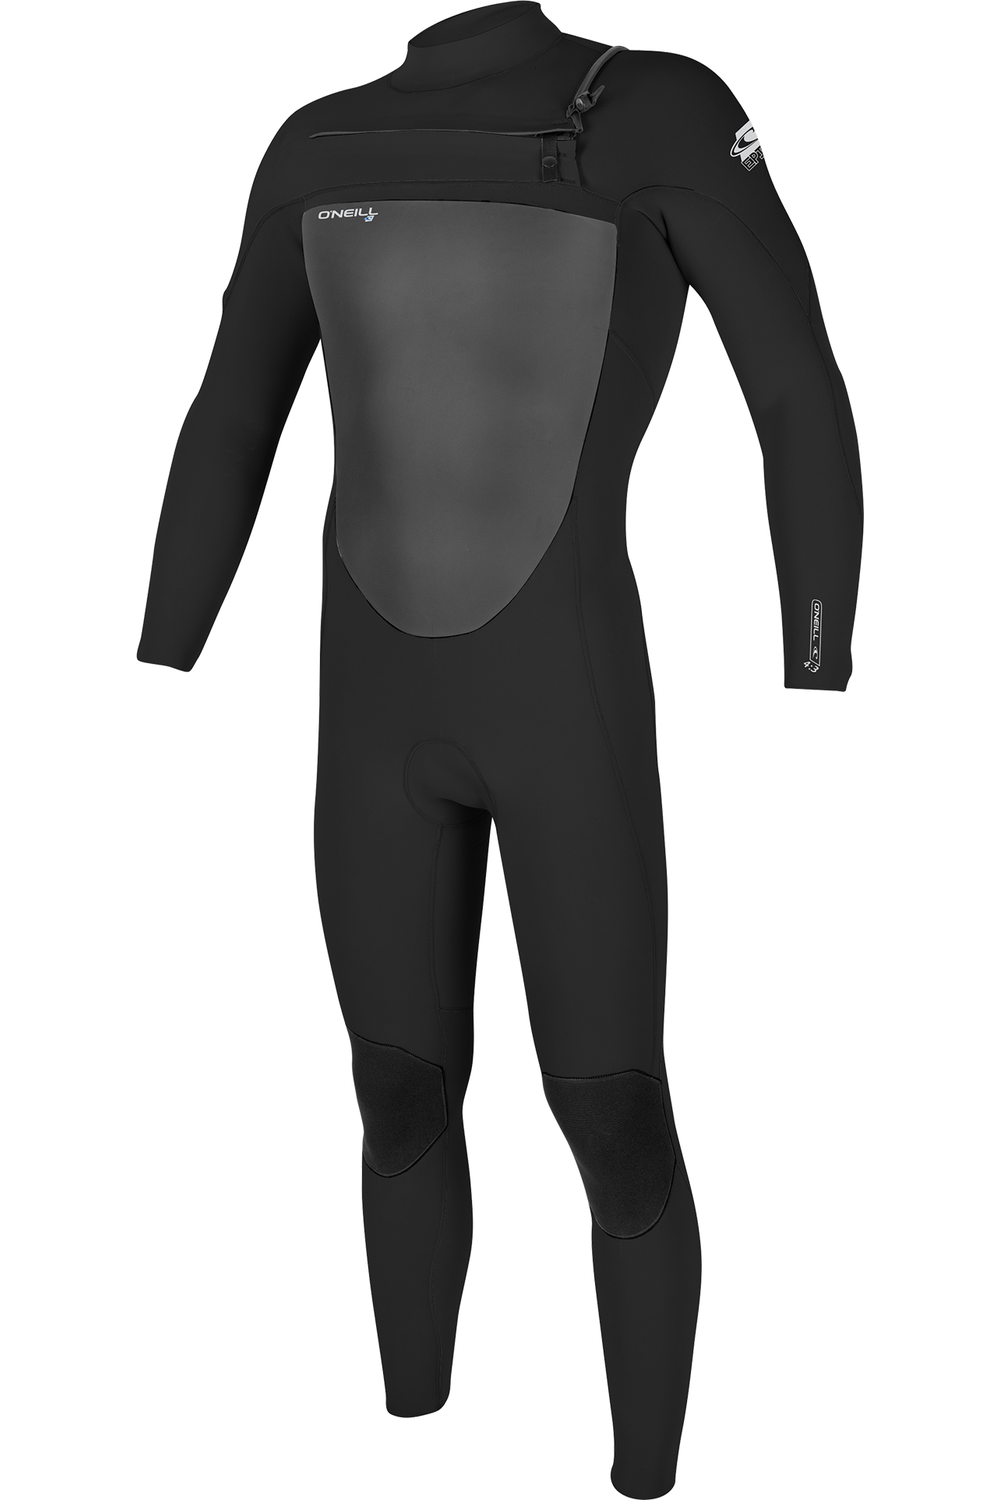 O'Neill Epic Wetsuit 4/3 With Chest Zip - Black